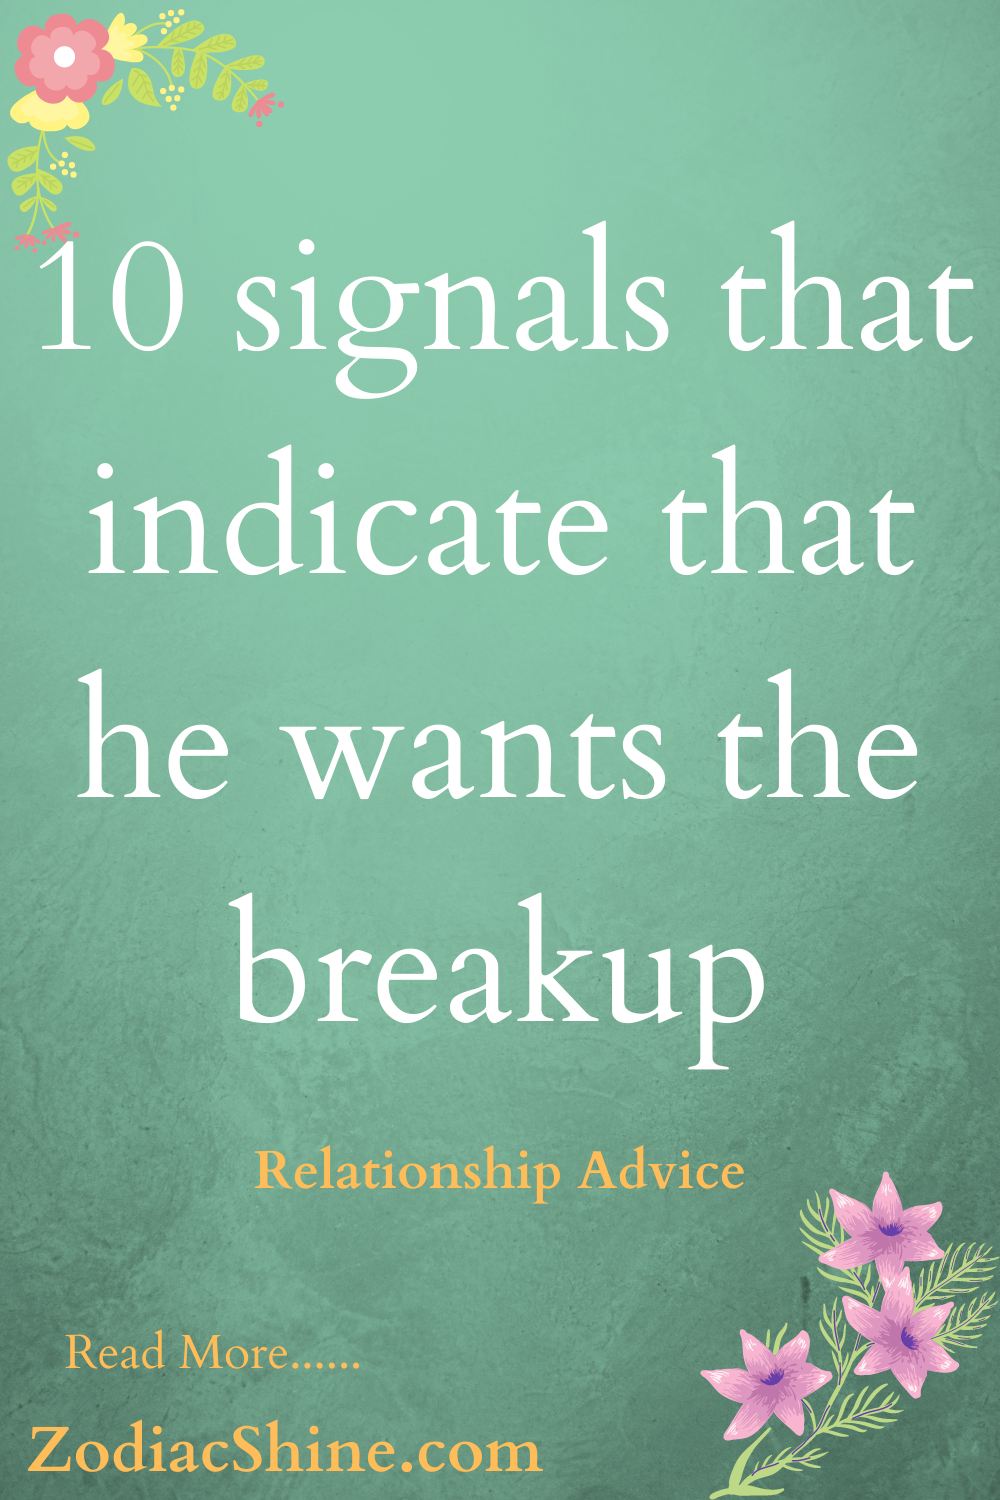 10 signals that indicate that he wants the breakup